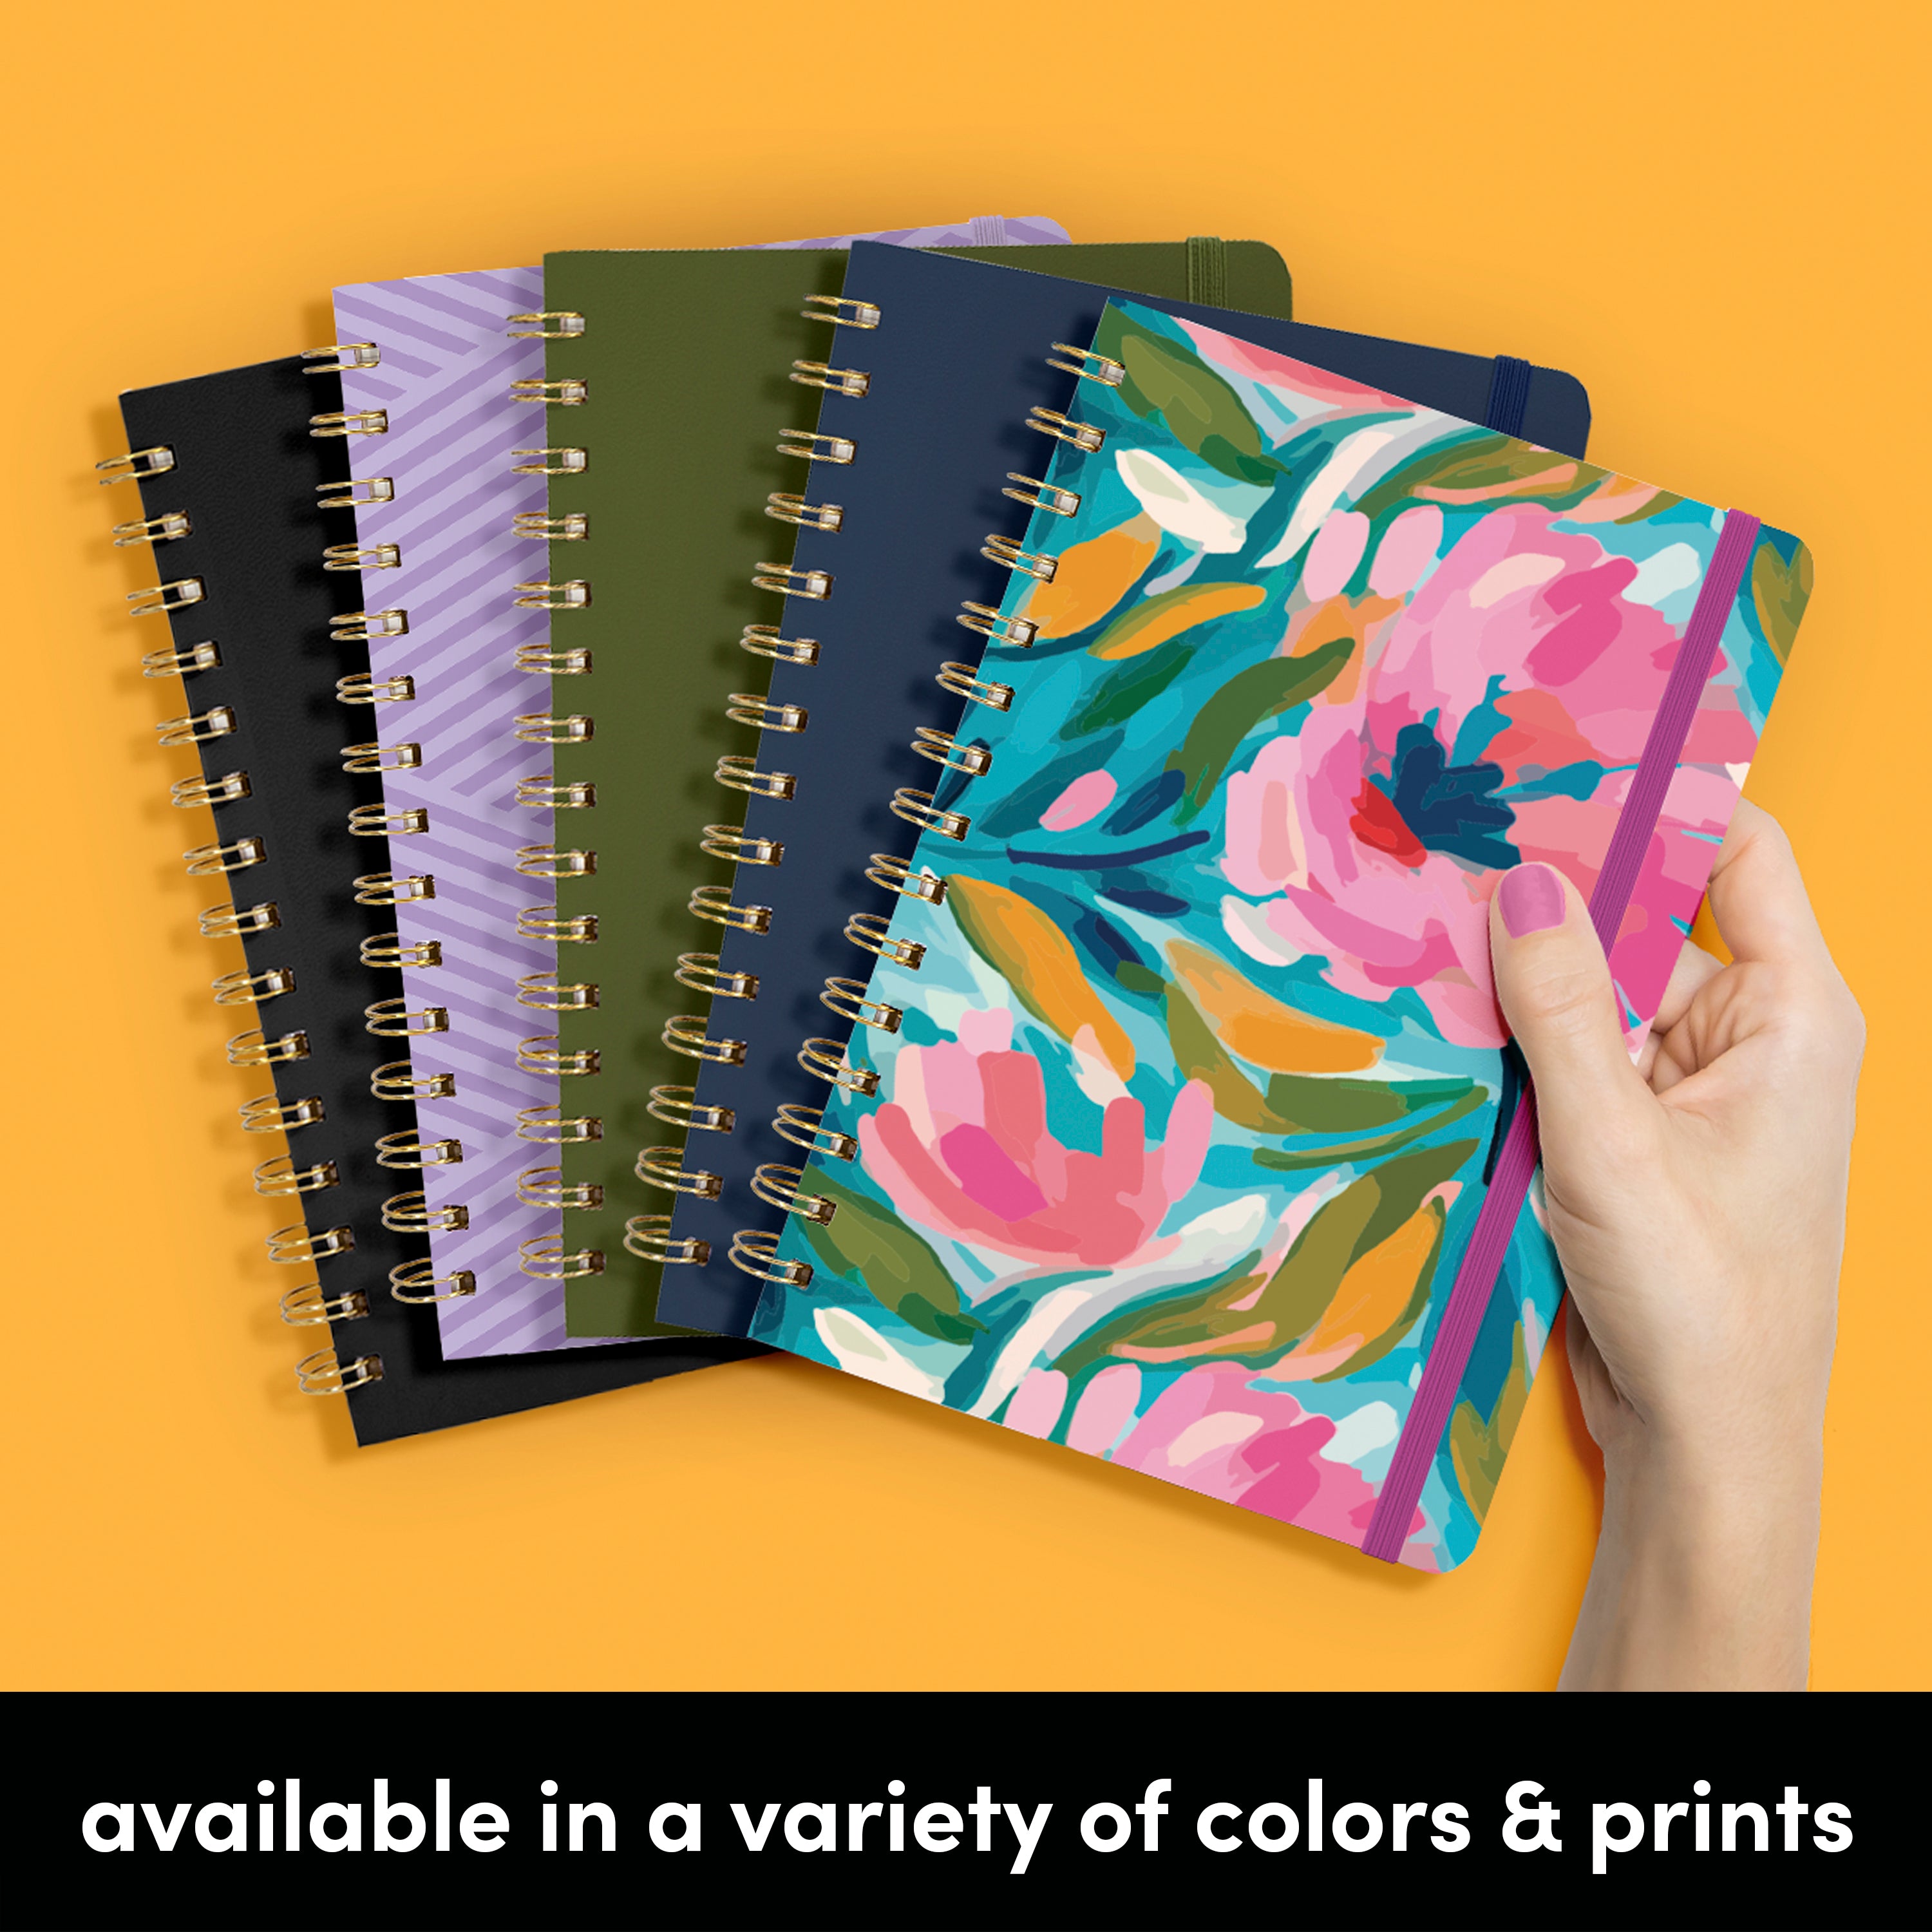 Printed Lined Paper Spiral-Bound Wiro Notebook Journal, Hardcover (5.5 in x 8 in)